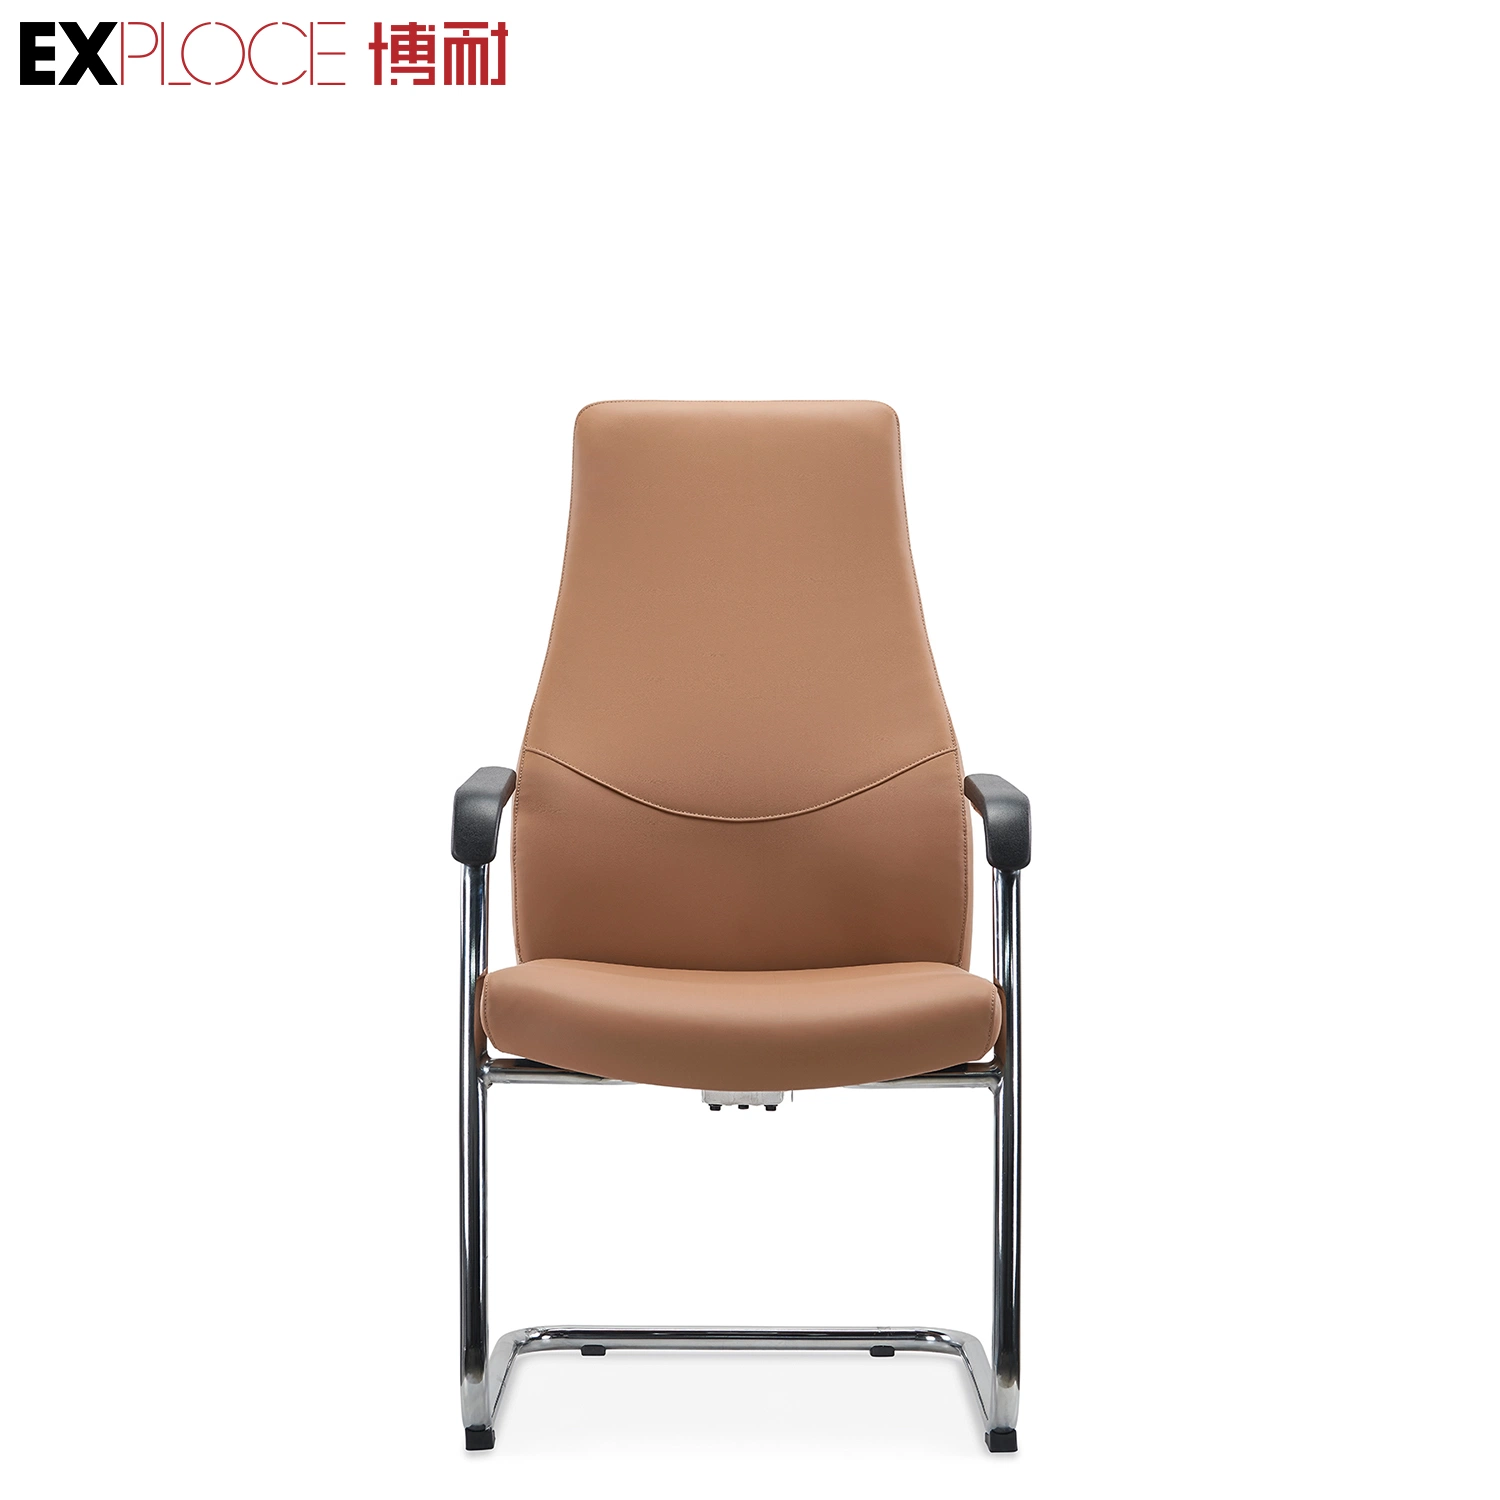 Industrial Style Modern Simple MID Back Chair PU Genuine Leather Office Desk Computer Chairs Home Furniture Set